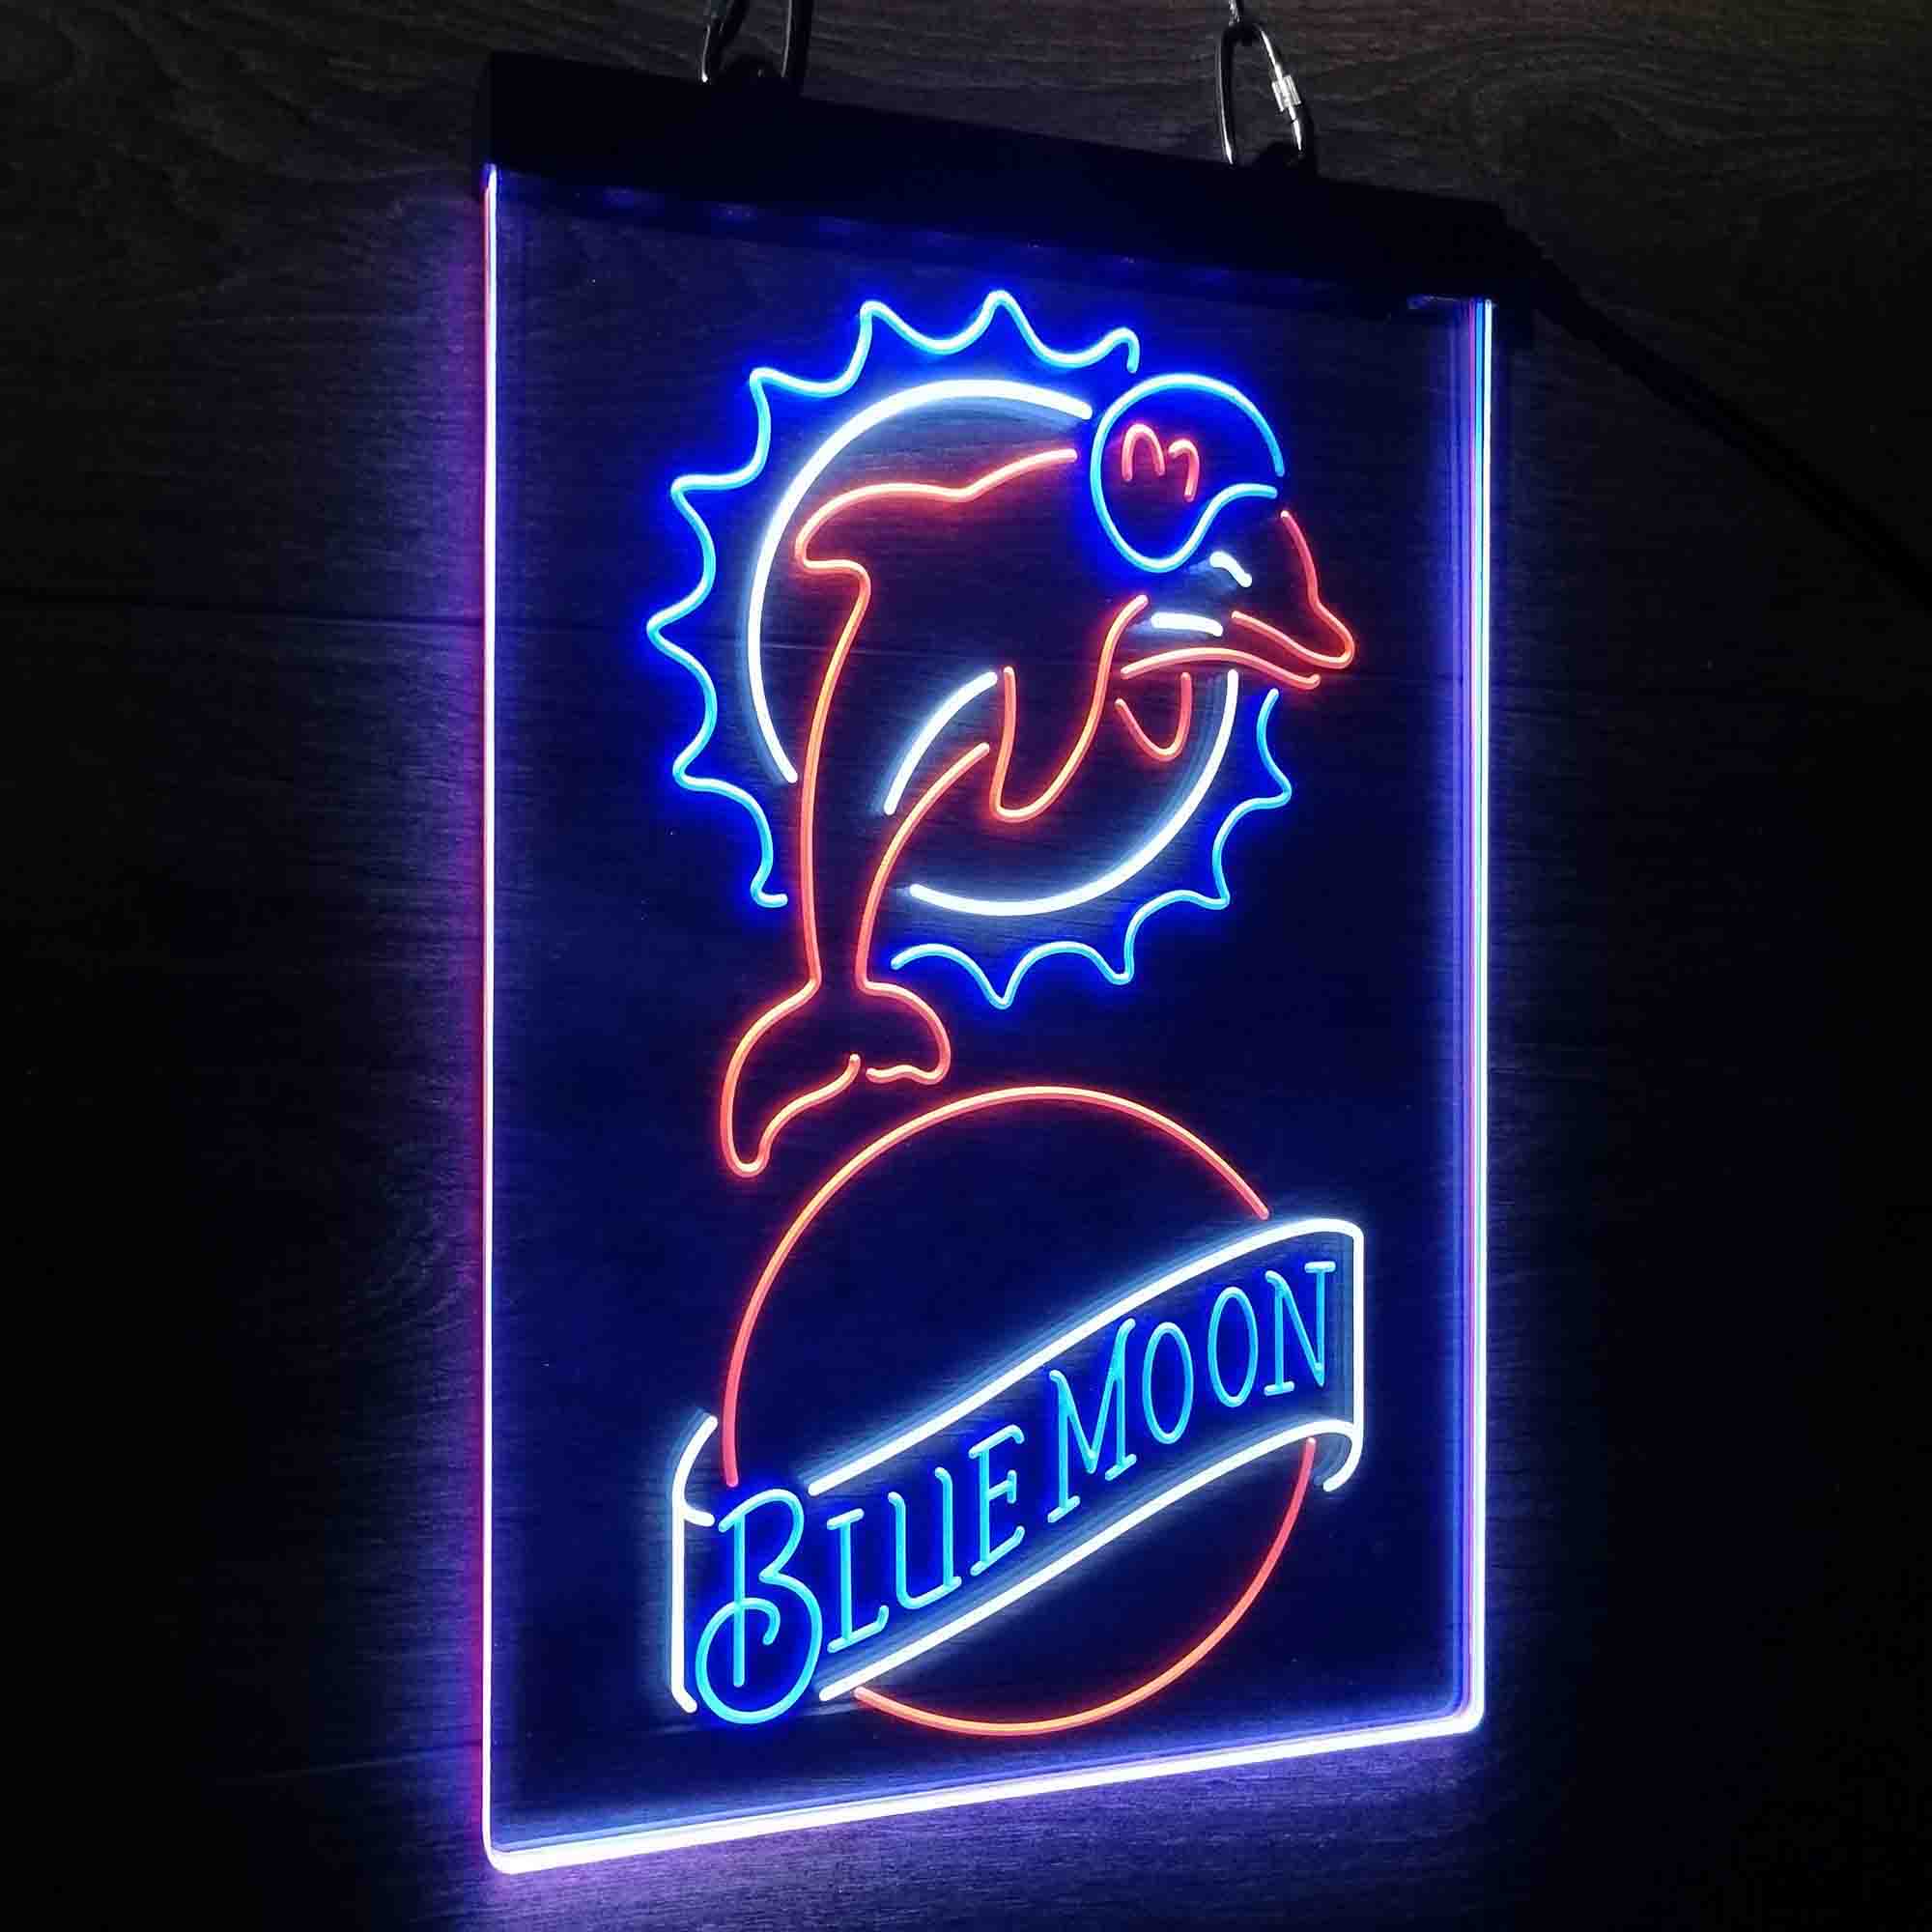 Miami Dolphins Blue Moon Bar Neon LED Sign 3 Colors